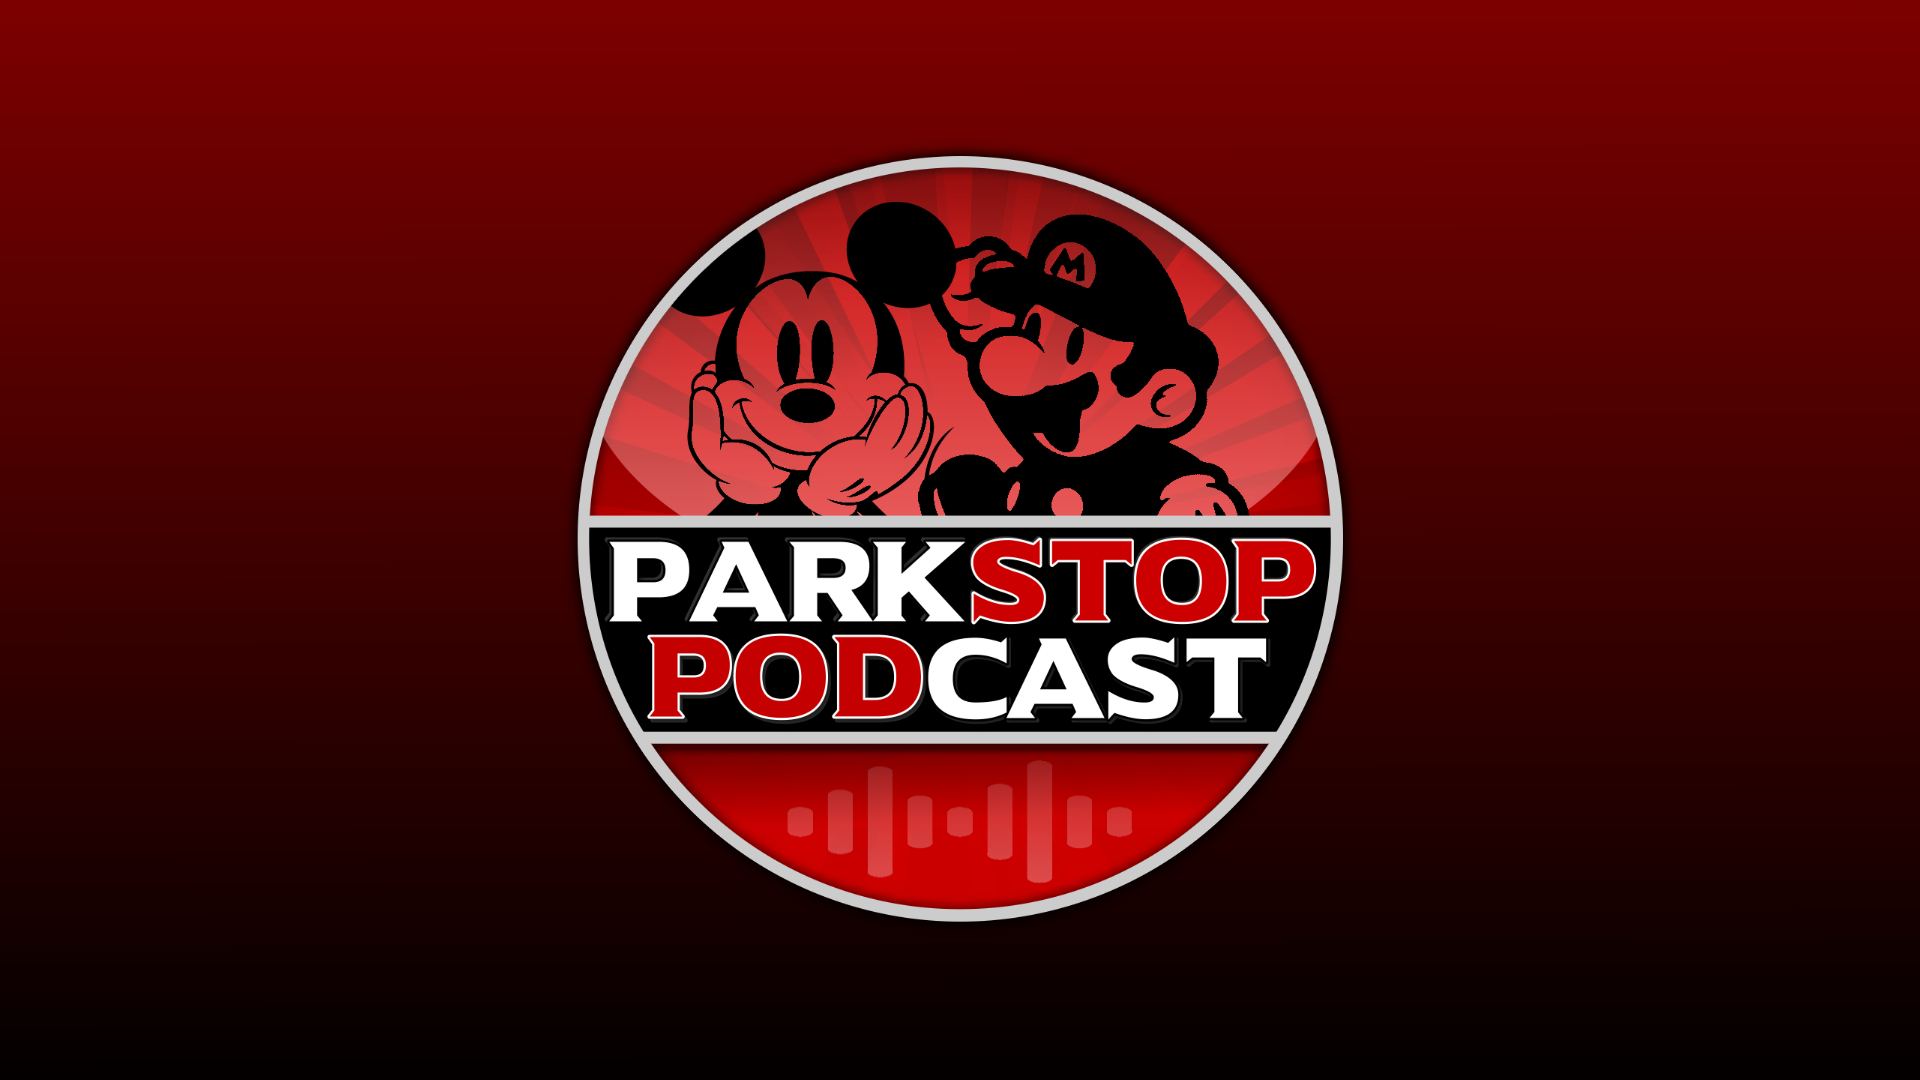 ParkStop Podcast – Interview with Matthew Serrano, Director of Live from the Space Stage